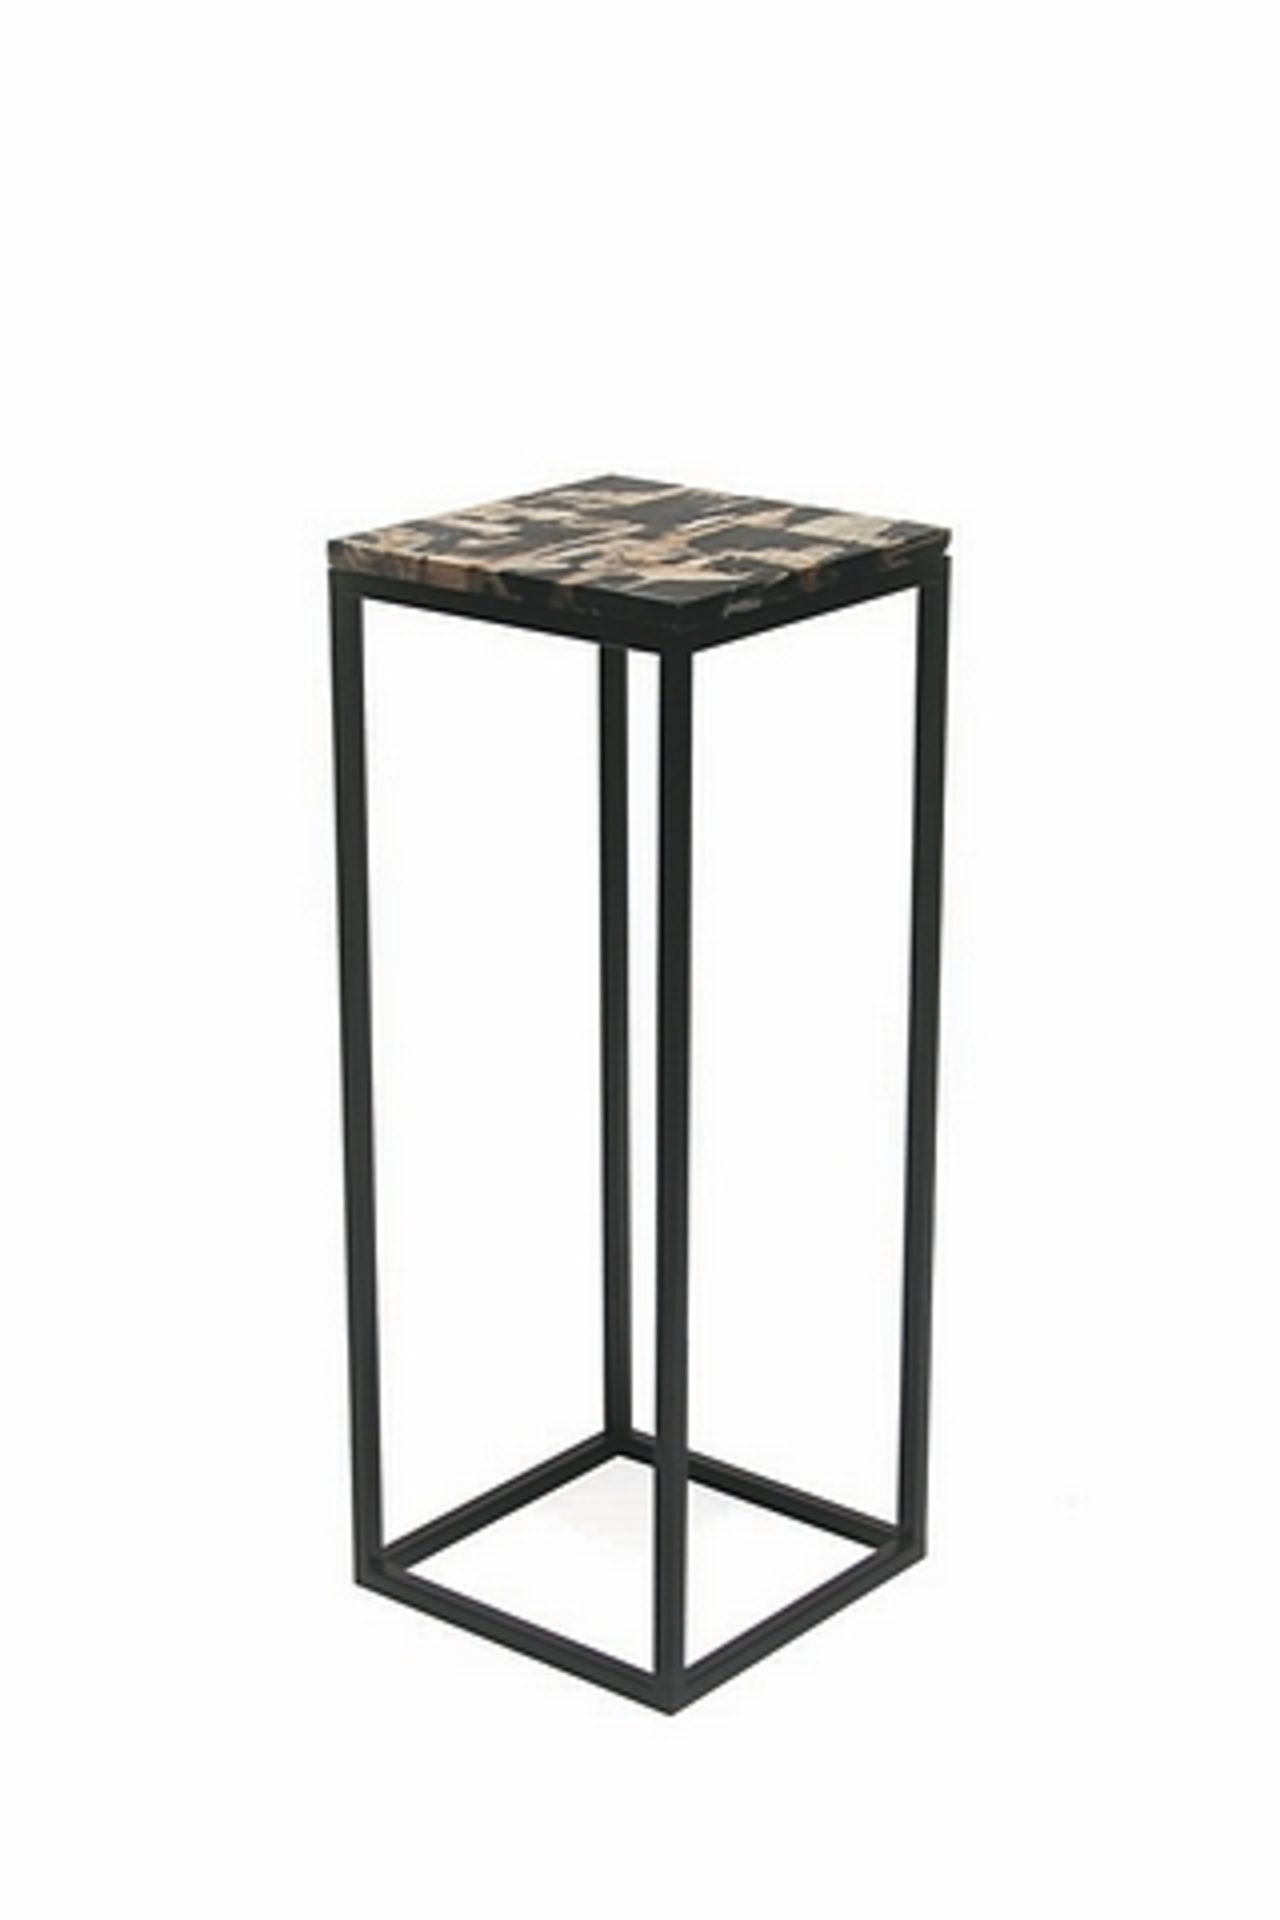 Side Table solid top in mixed black and white petrified wood - petrified wood is the name given to a